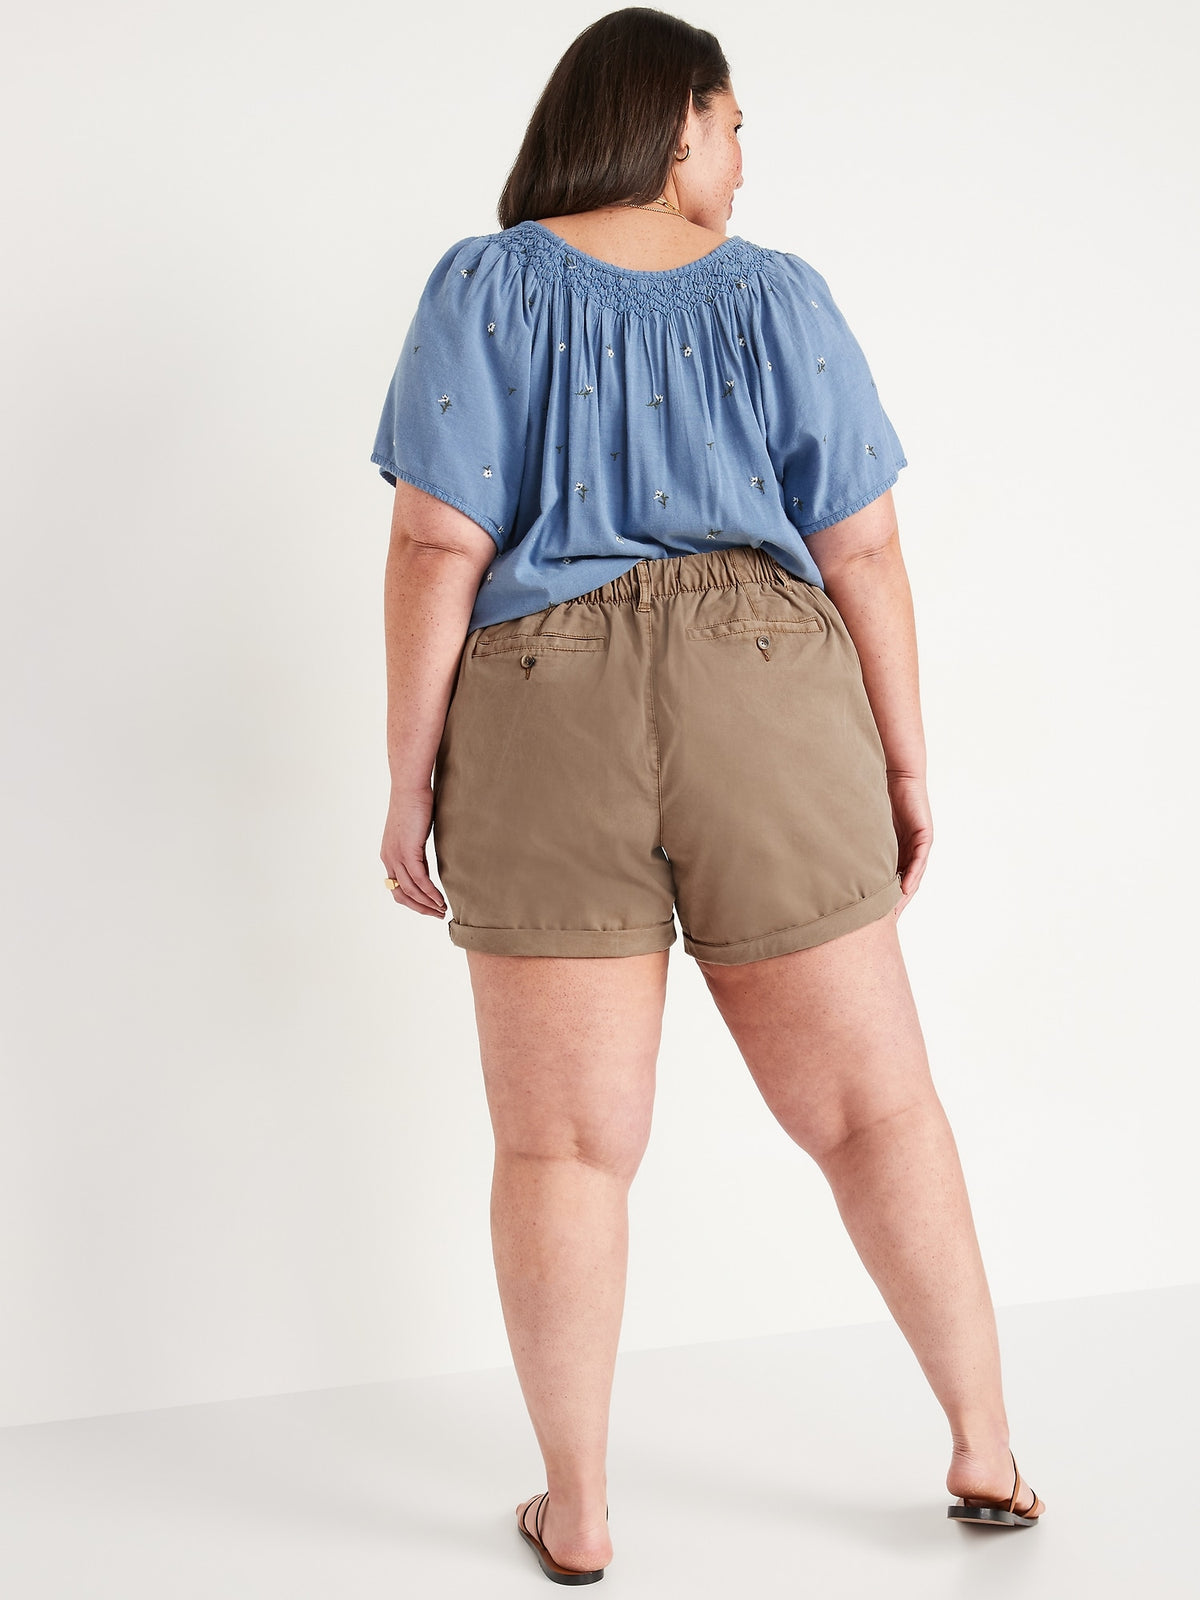 High-Waisted OGC Chino Shorts for Women -- 5-inch inseam